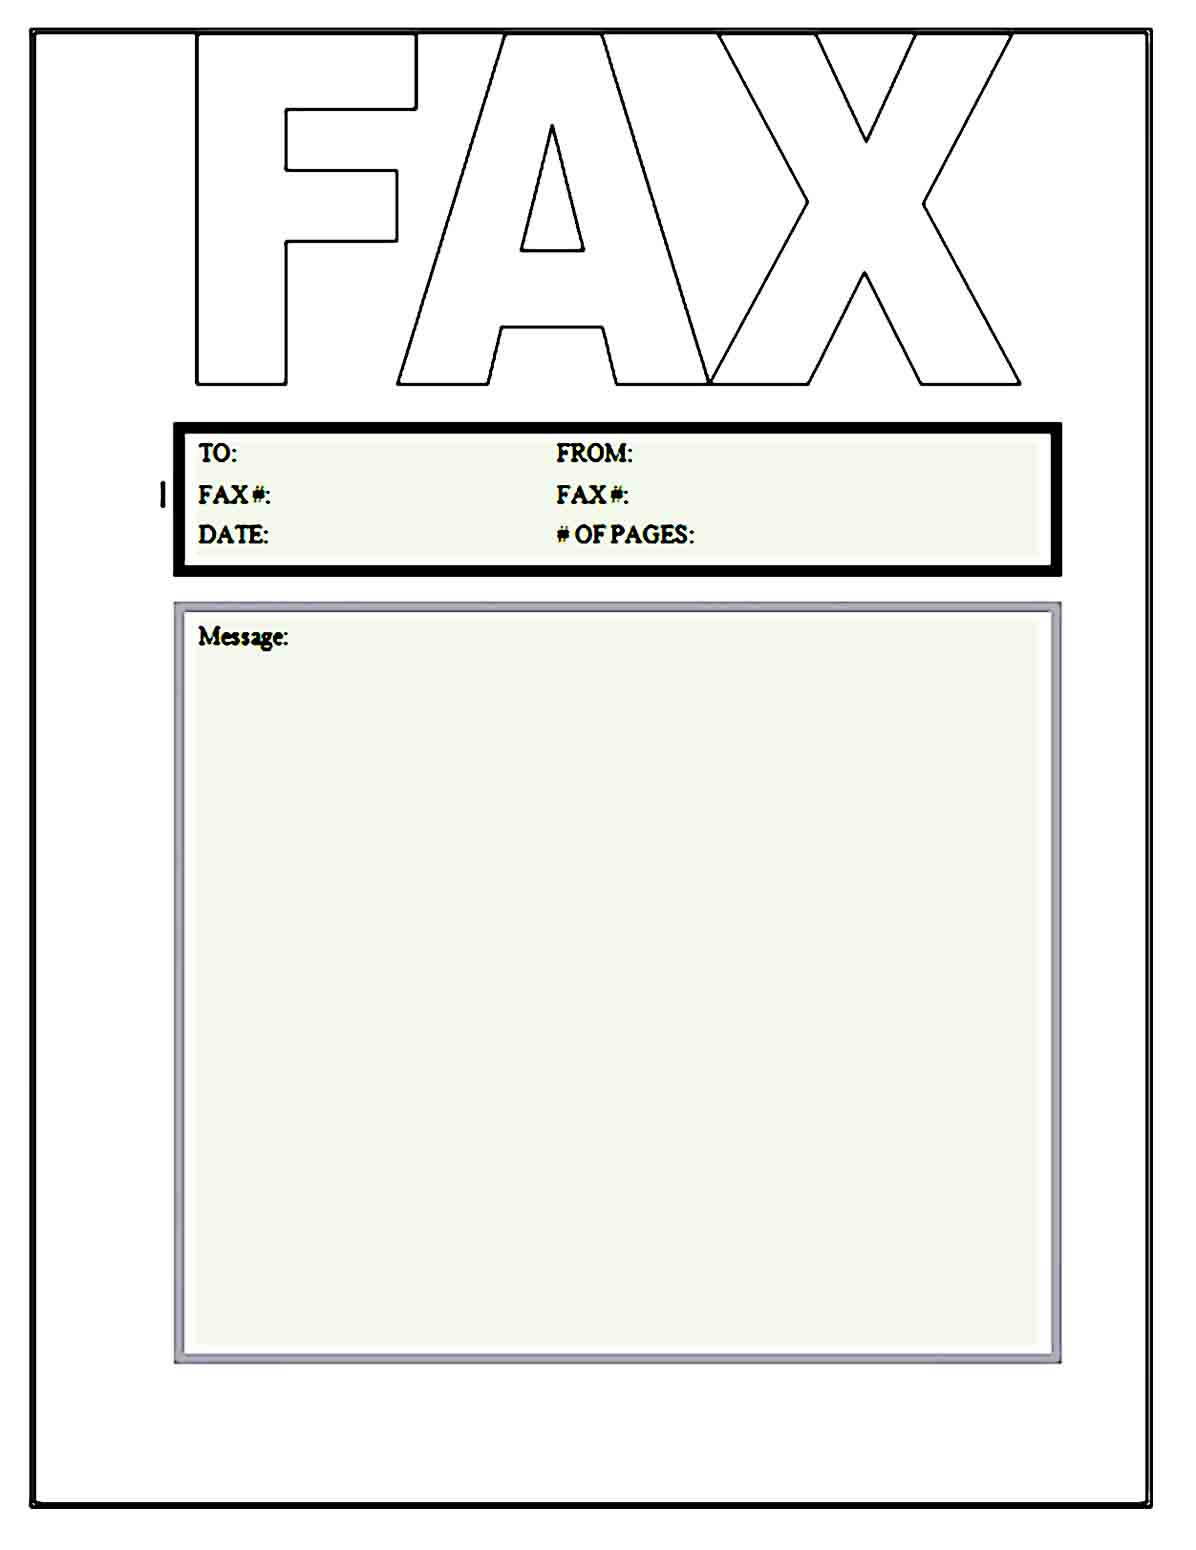 Fax Cover Sheet Template 06